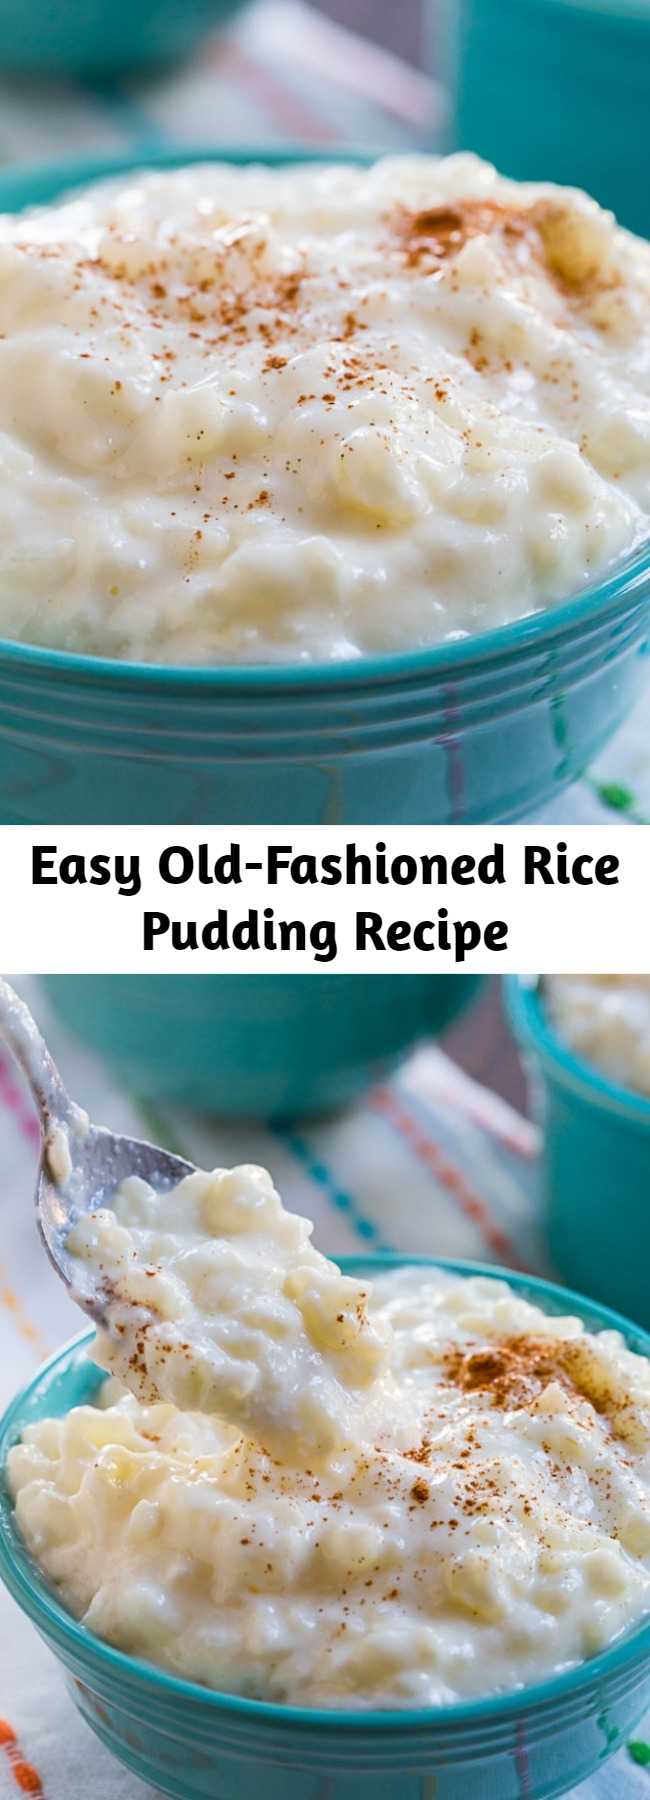 Easy Old-Fashioned Rice Pudding Recipe - Old-Fashioned Rice Pudding is so creamy with the perfect texture and sweetness. Only a handful of ingredients and a little patience are needed to make this old time favorite dessert.